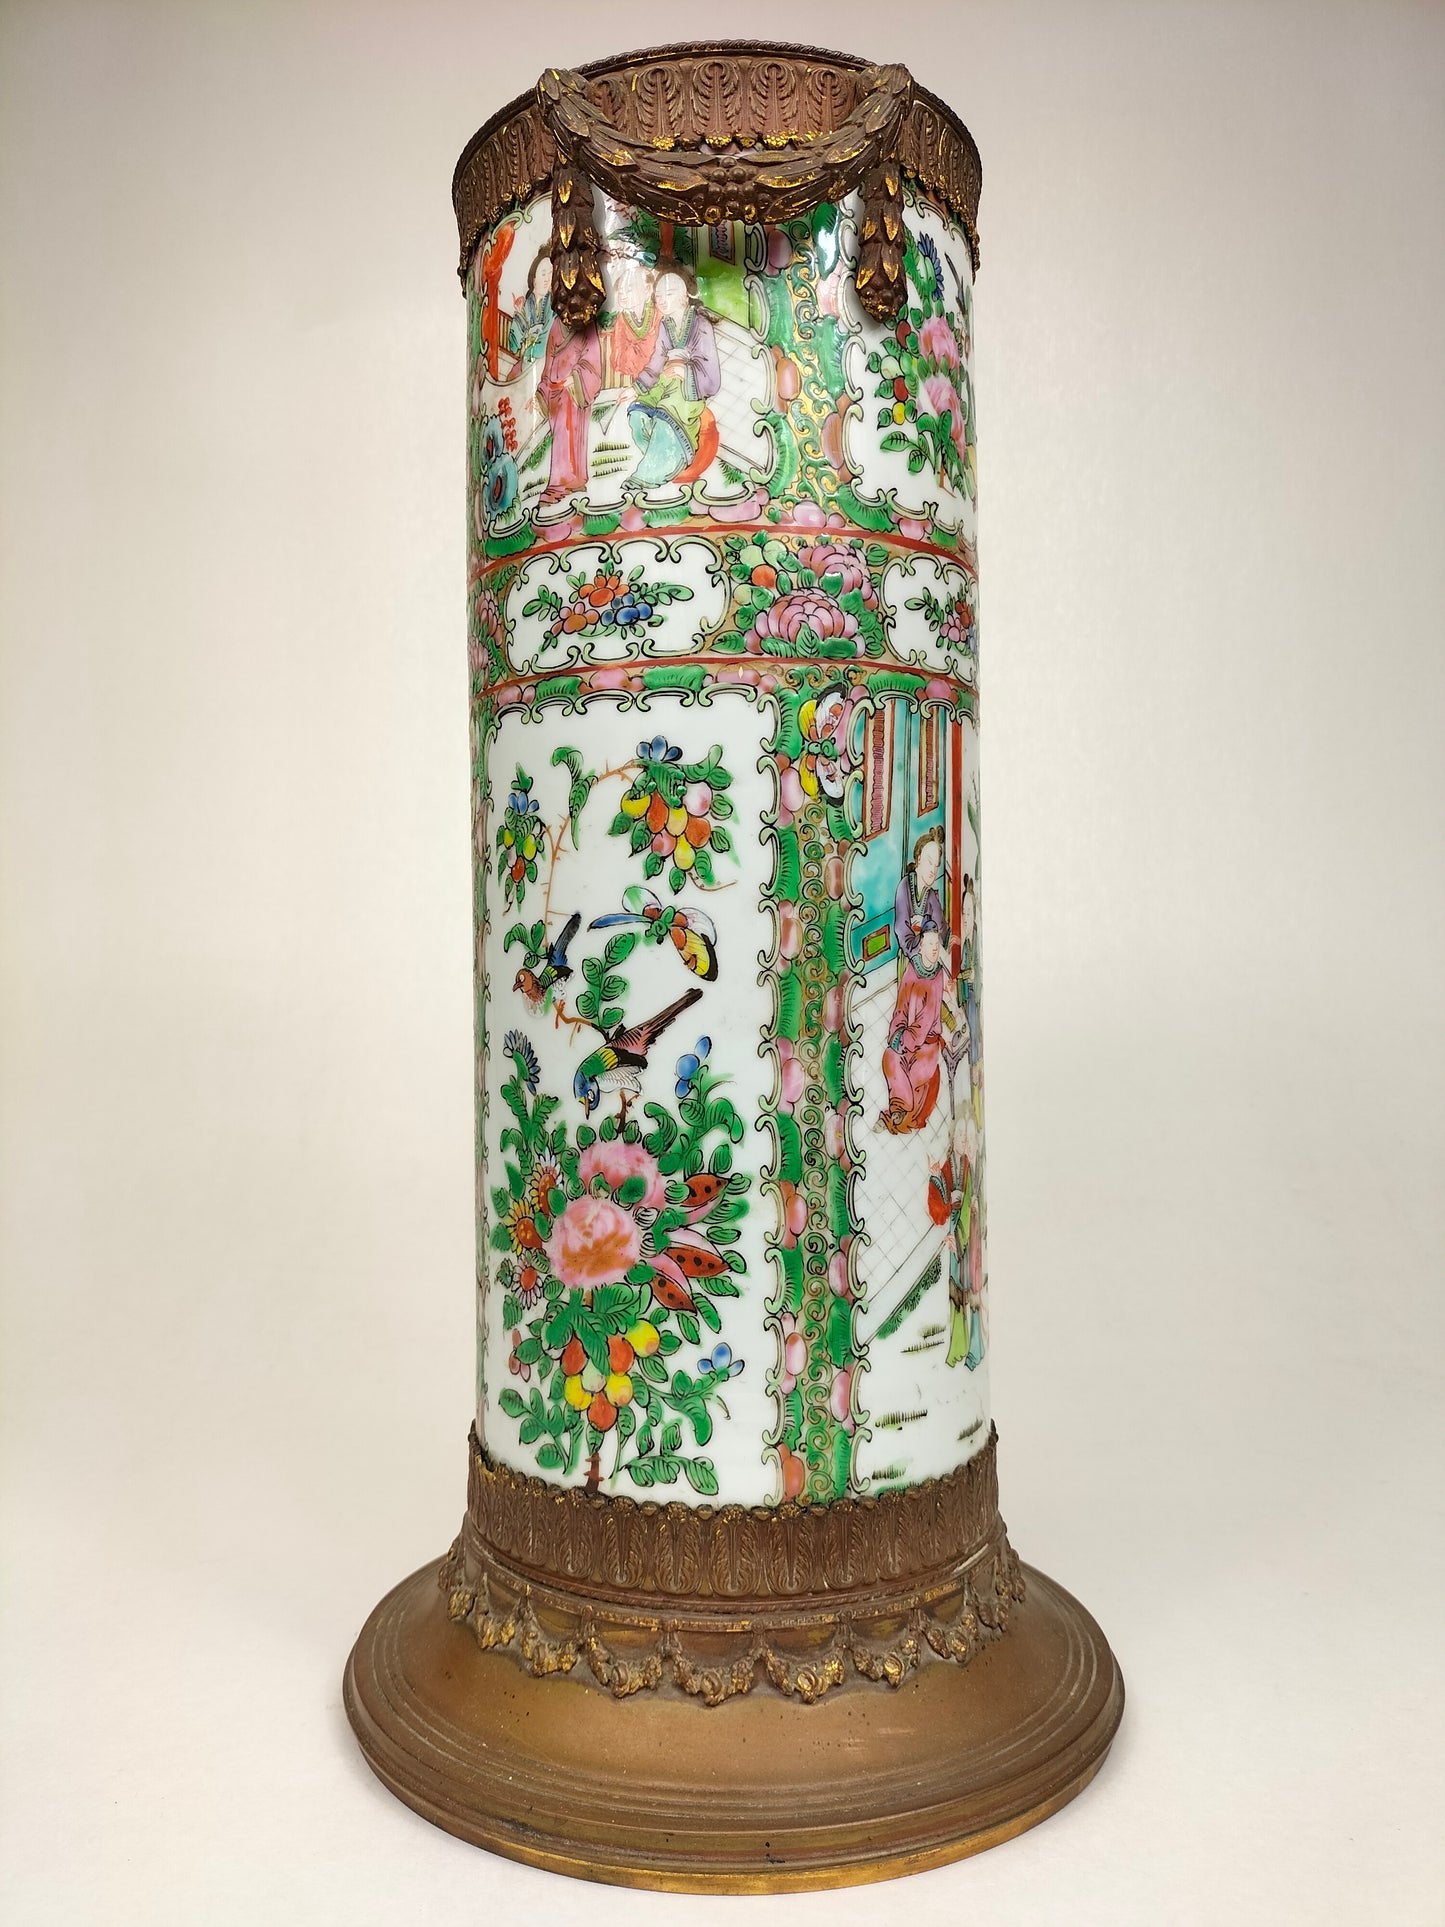 Antique Chinese canton rose medallion vase inlaid in a gilded frame // Qing Dynasty - 19th century